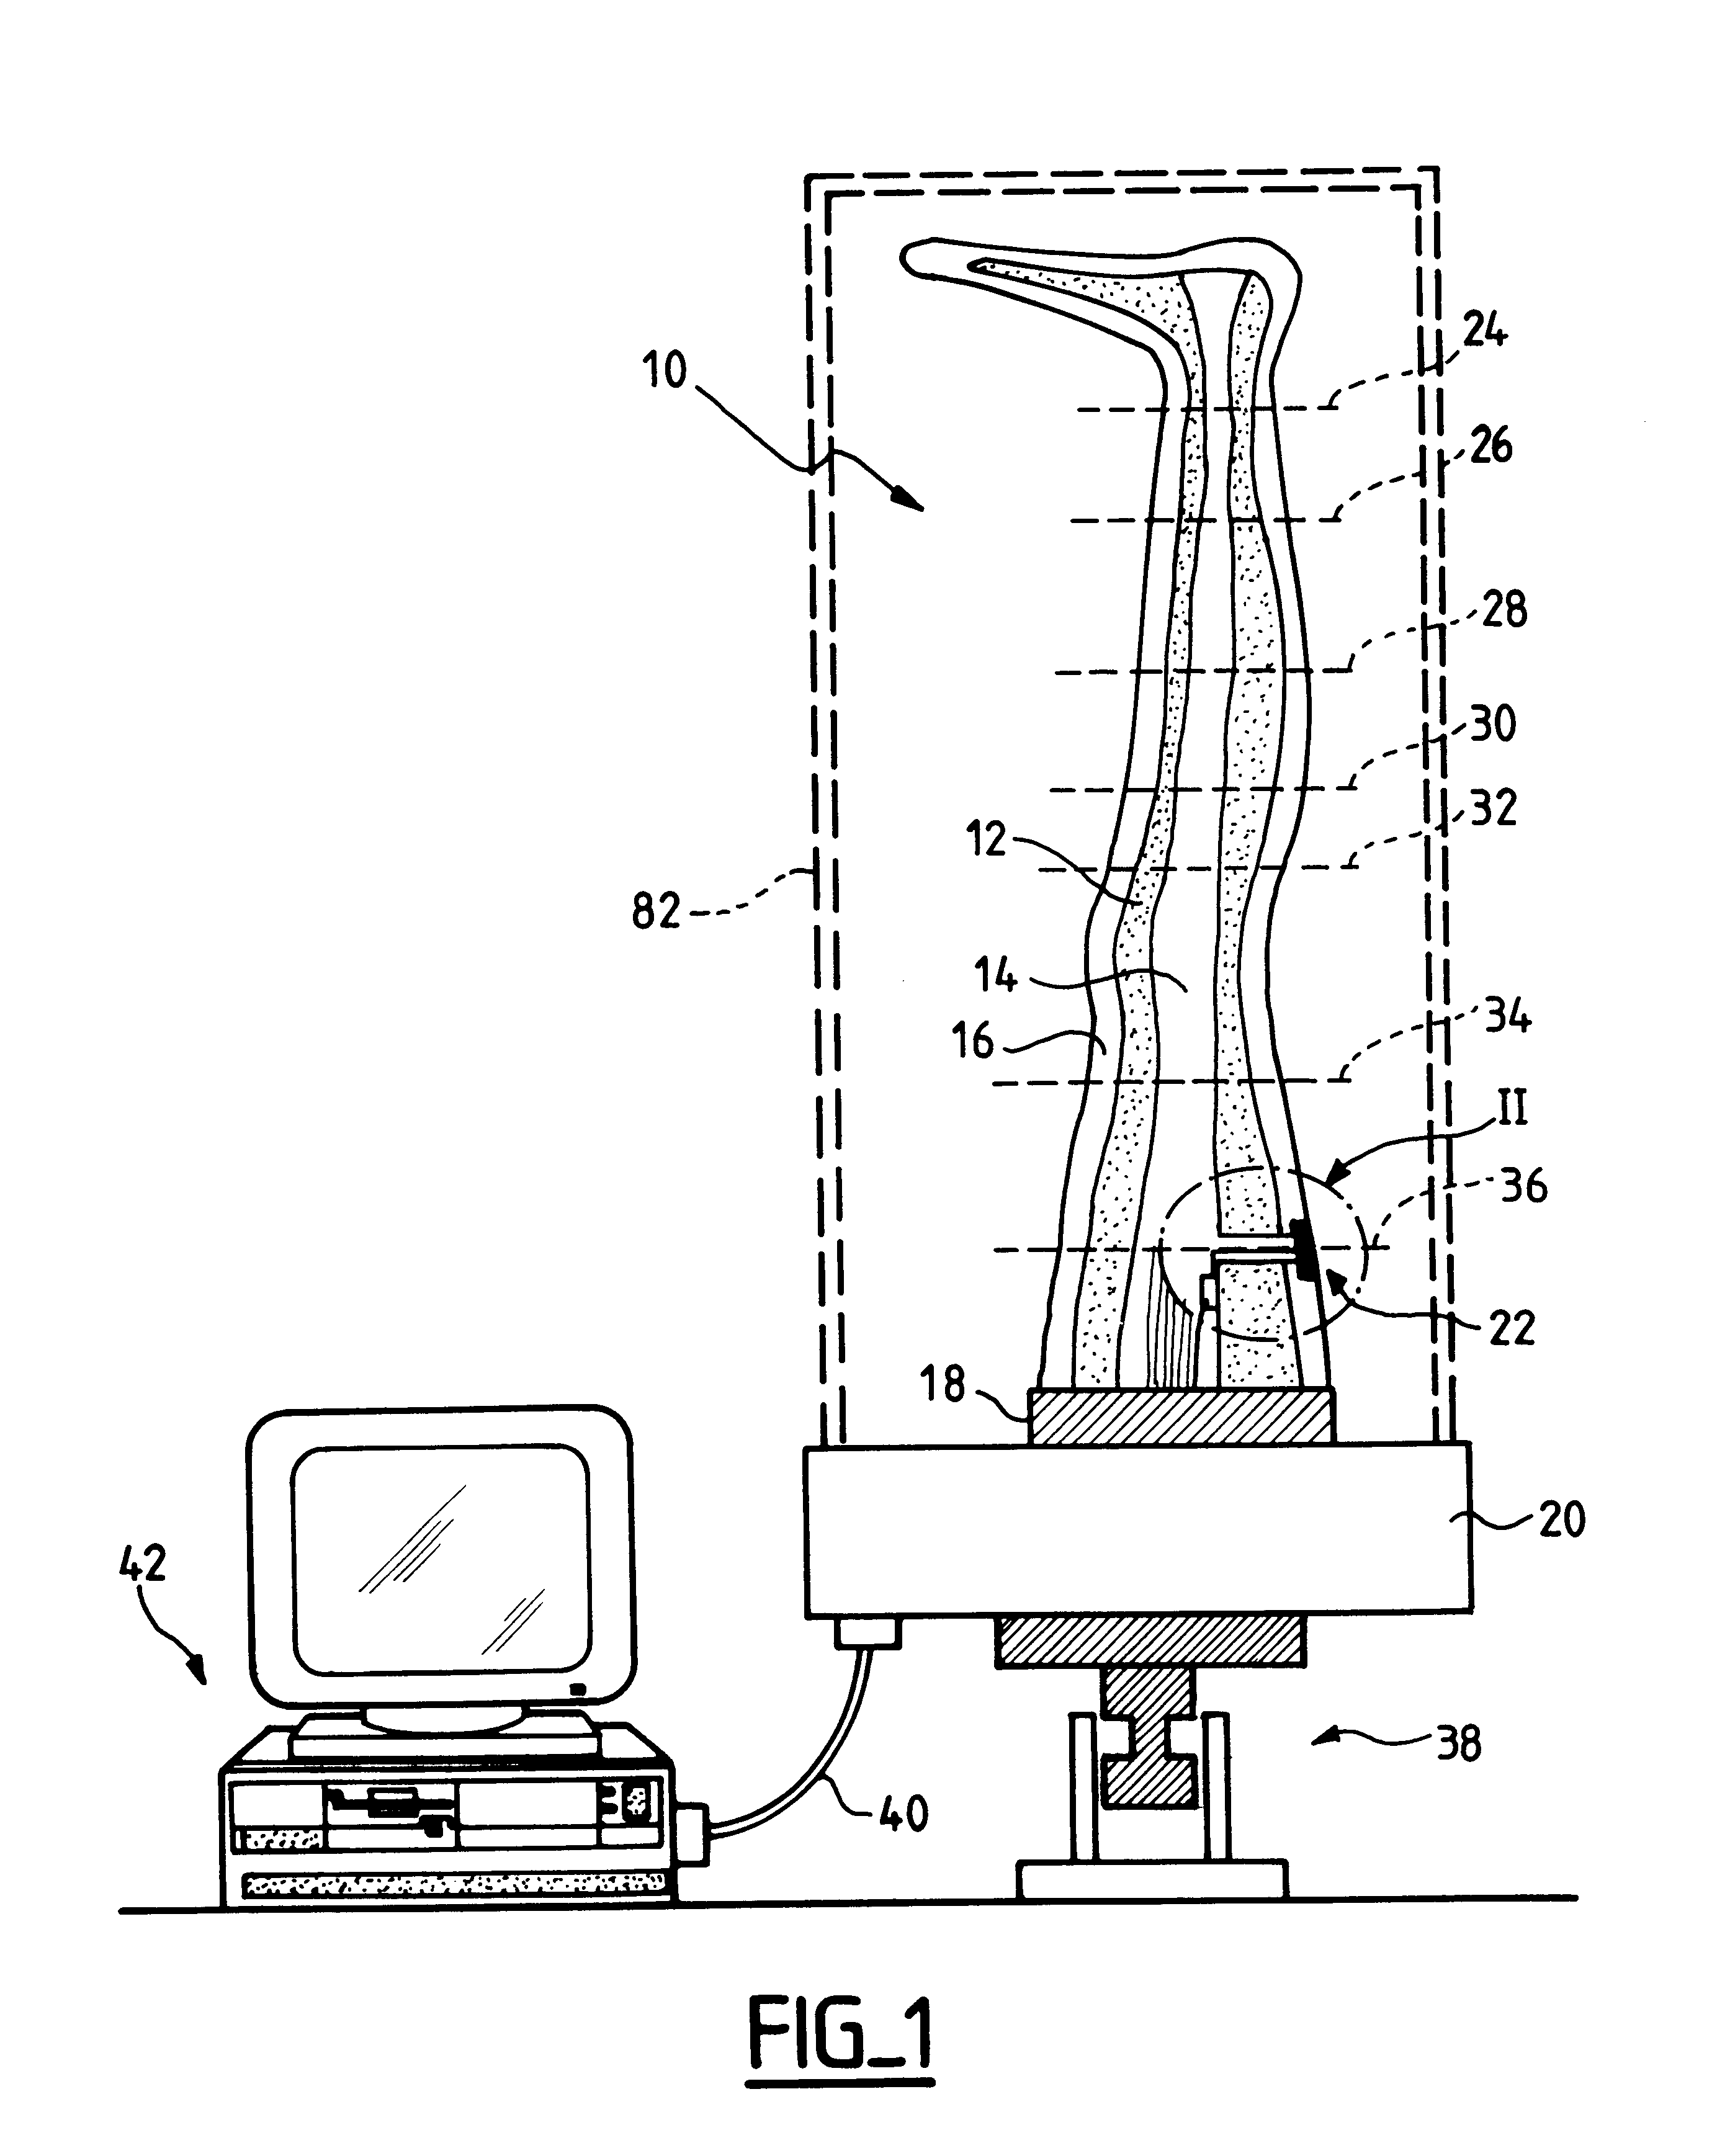 Device for measuring pressure points to be applied by a compressive orthotic device